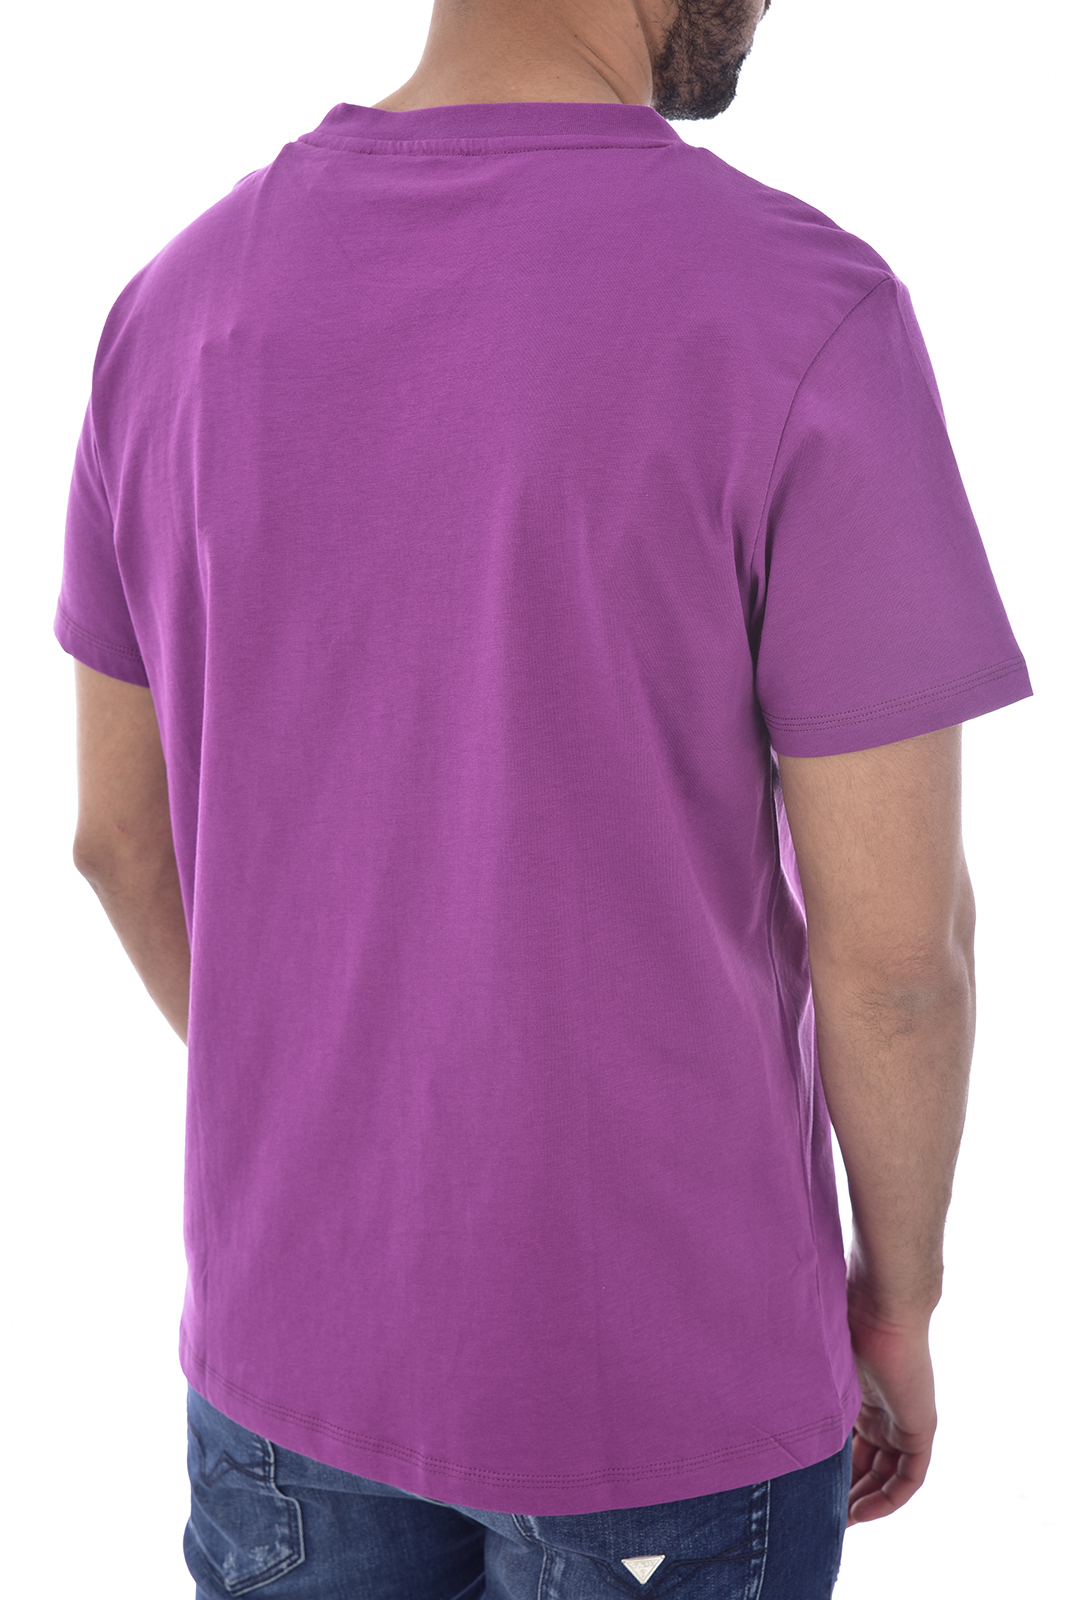 Tee-shirt violet manches courtes homme - Guess F92i00